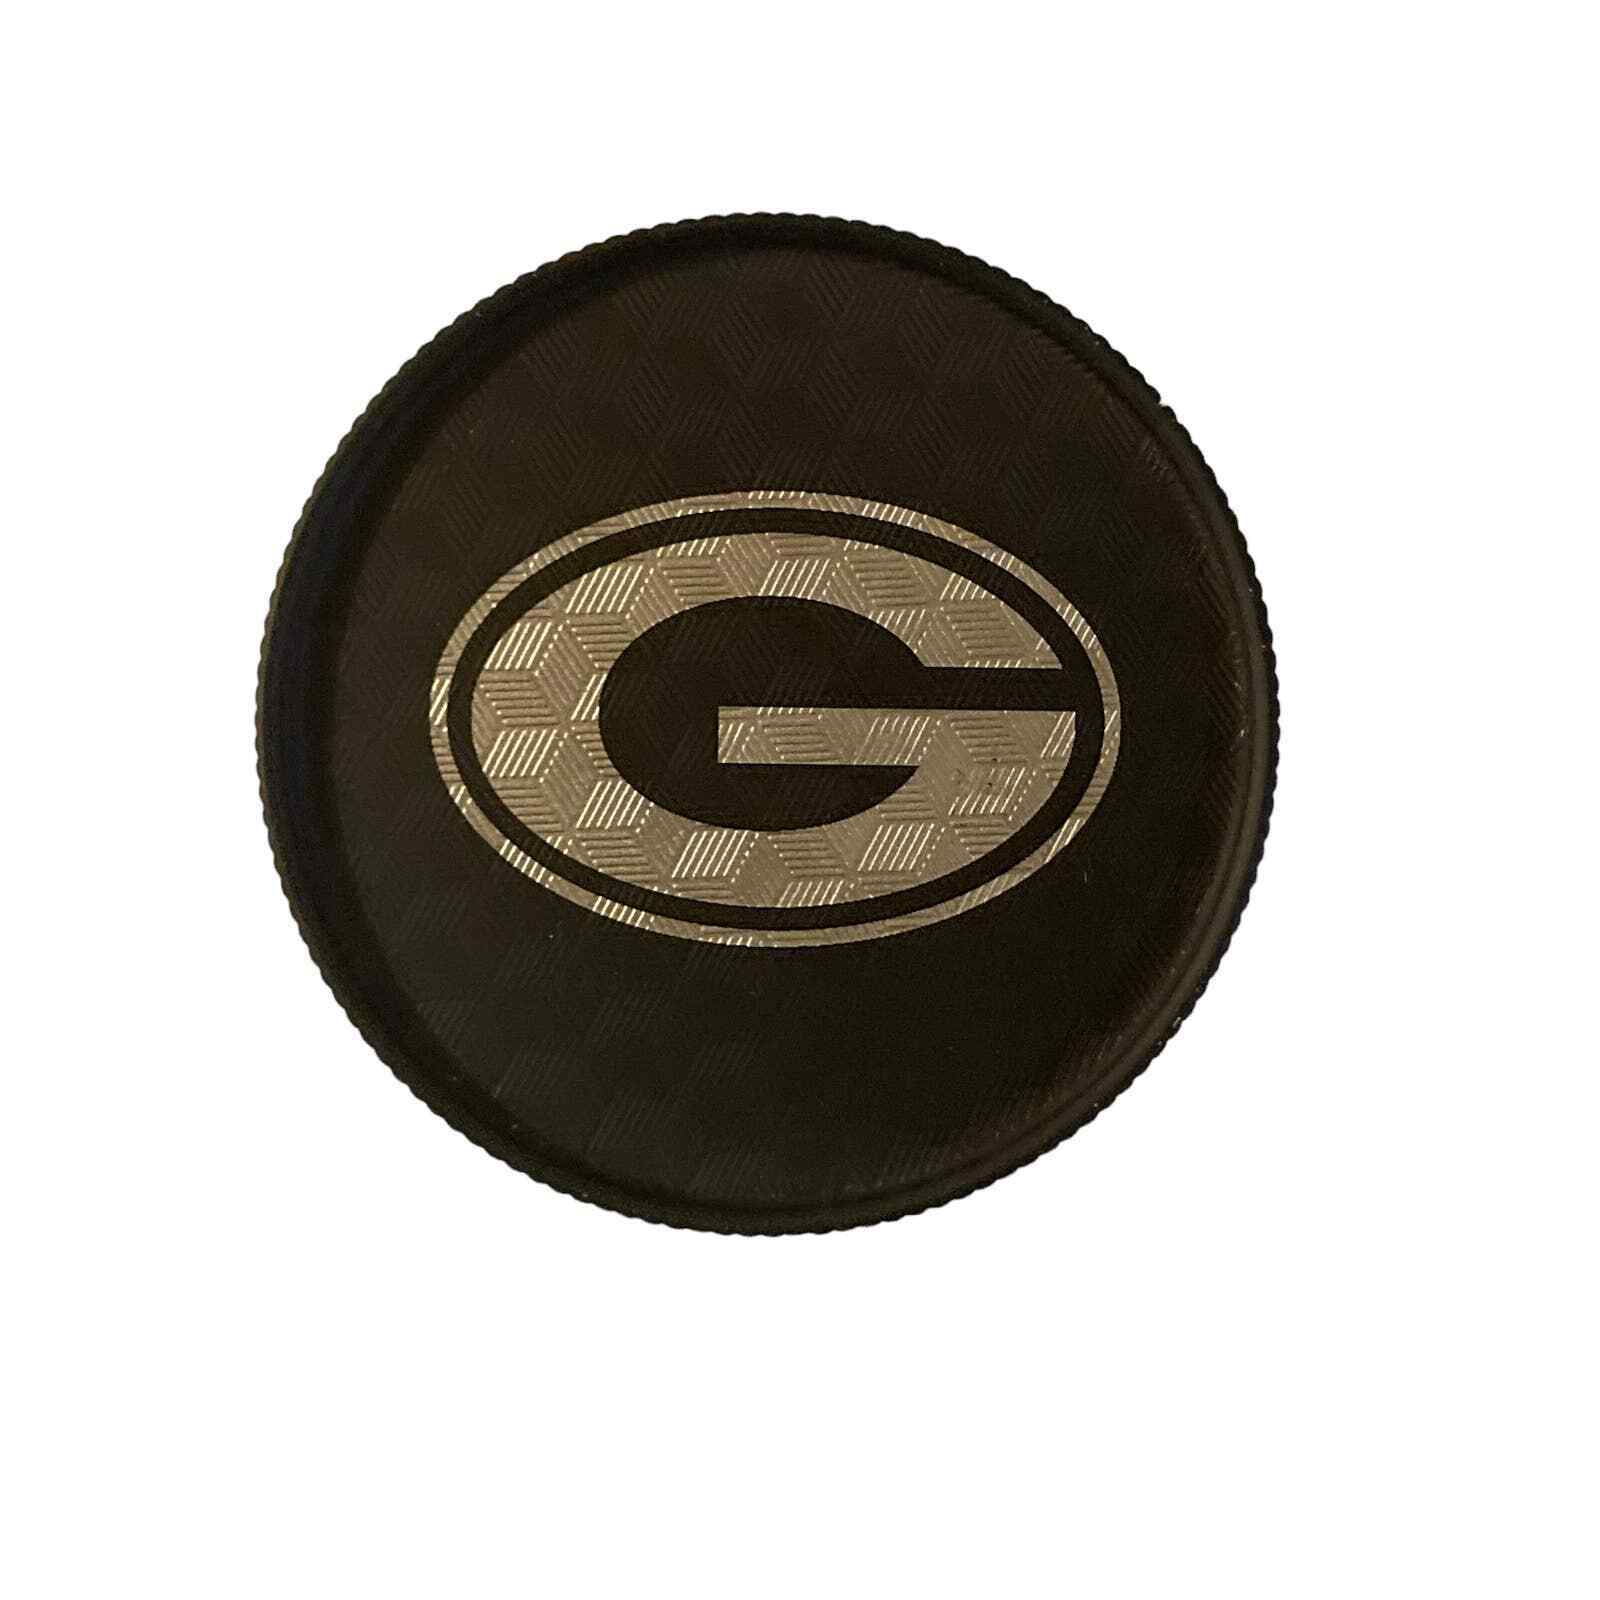 Green Bay Packers Engraved Spice Grinder